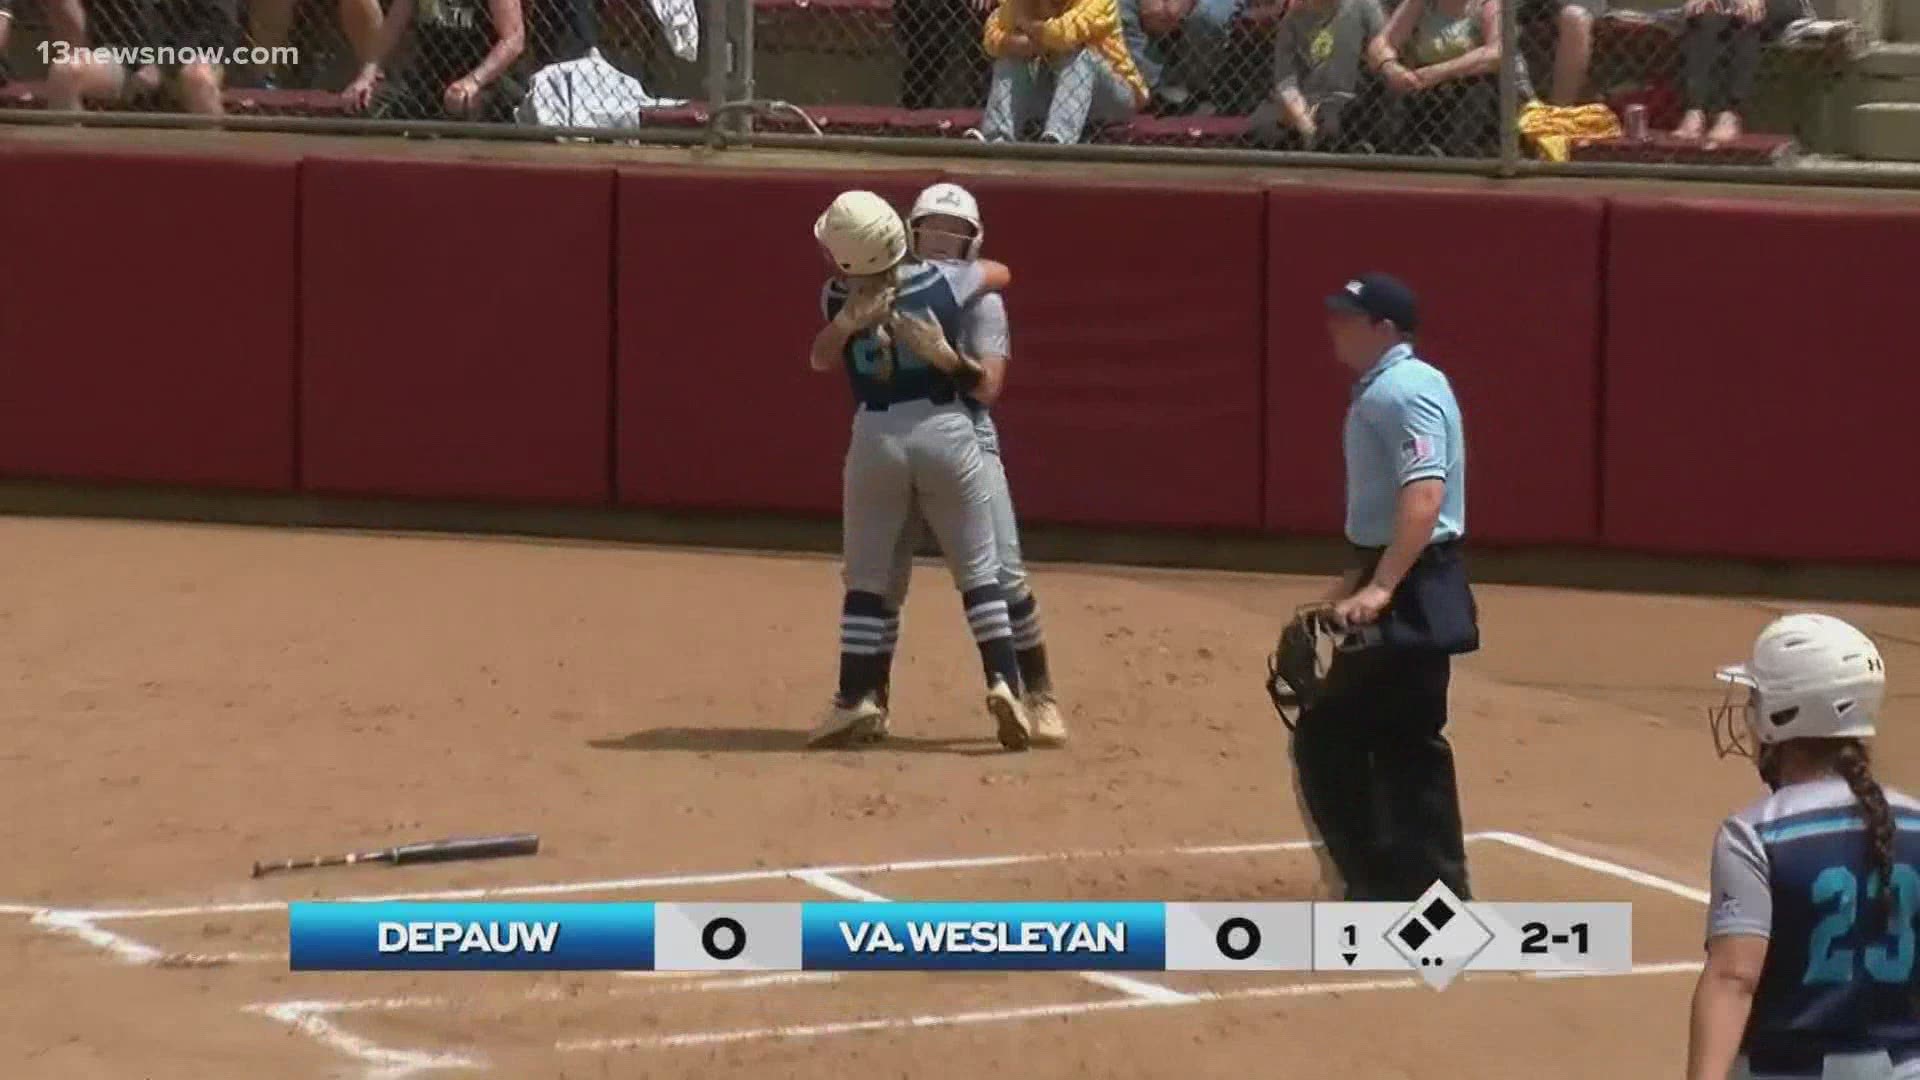 Jessica Goldyn lead off the third inning with a solo home run over the right field fence to put VWU up 3-0.